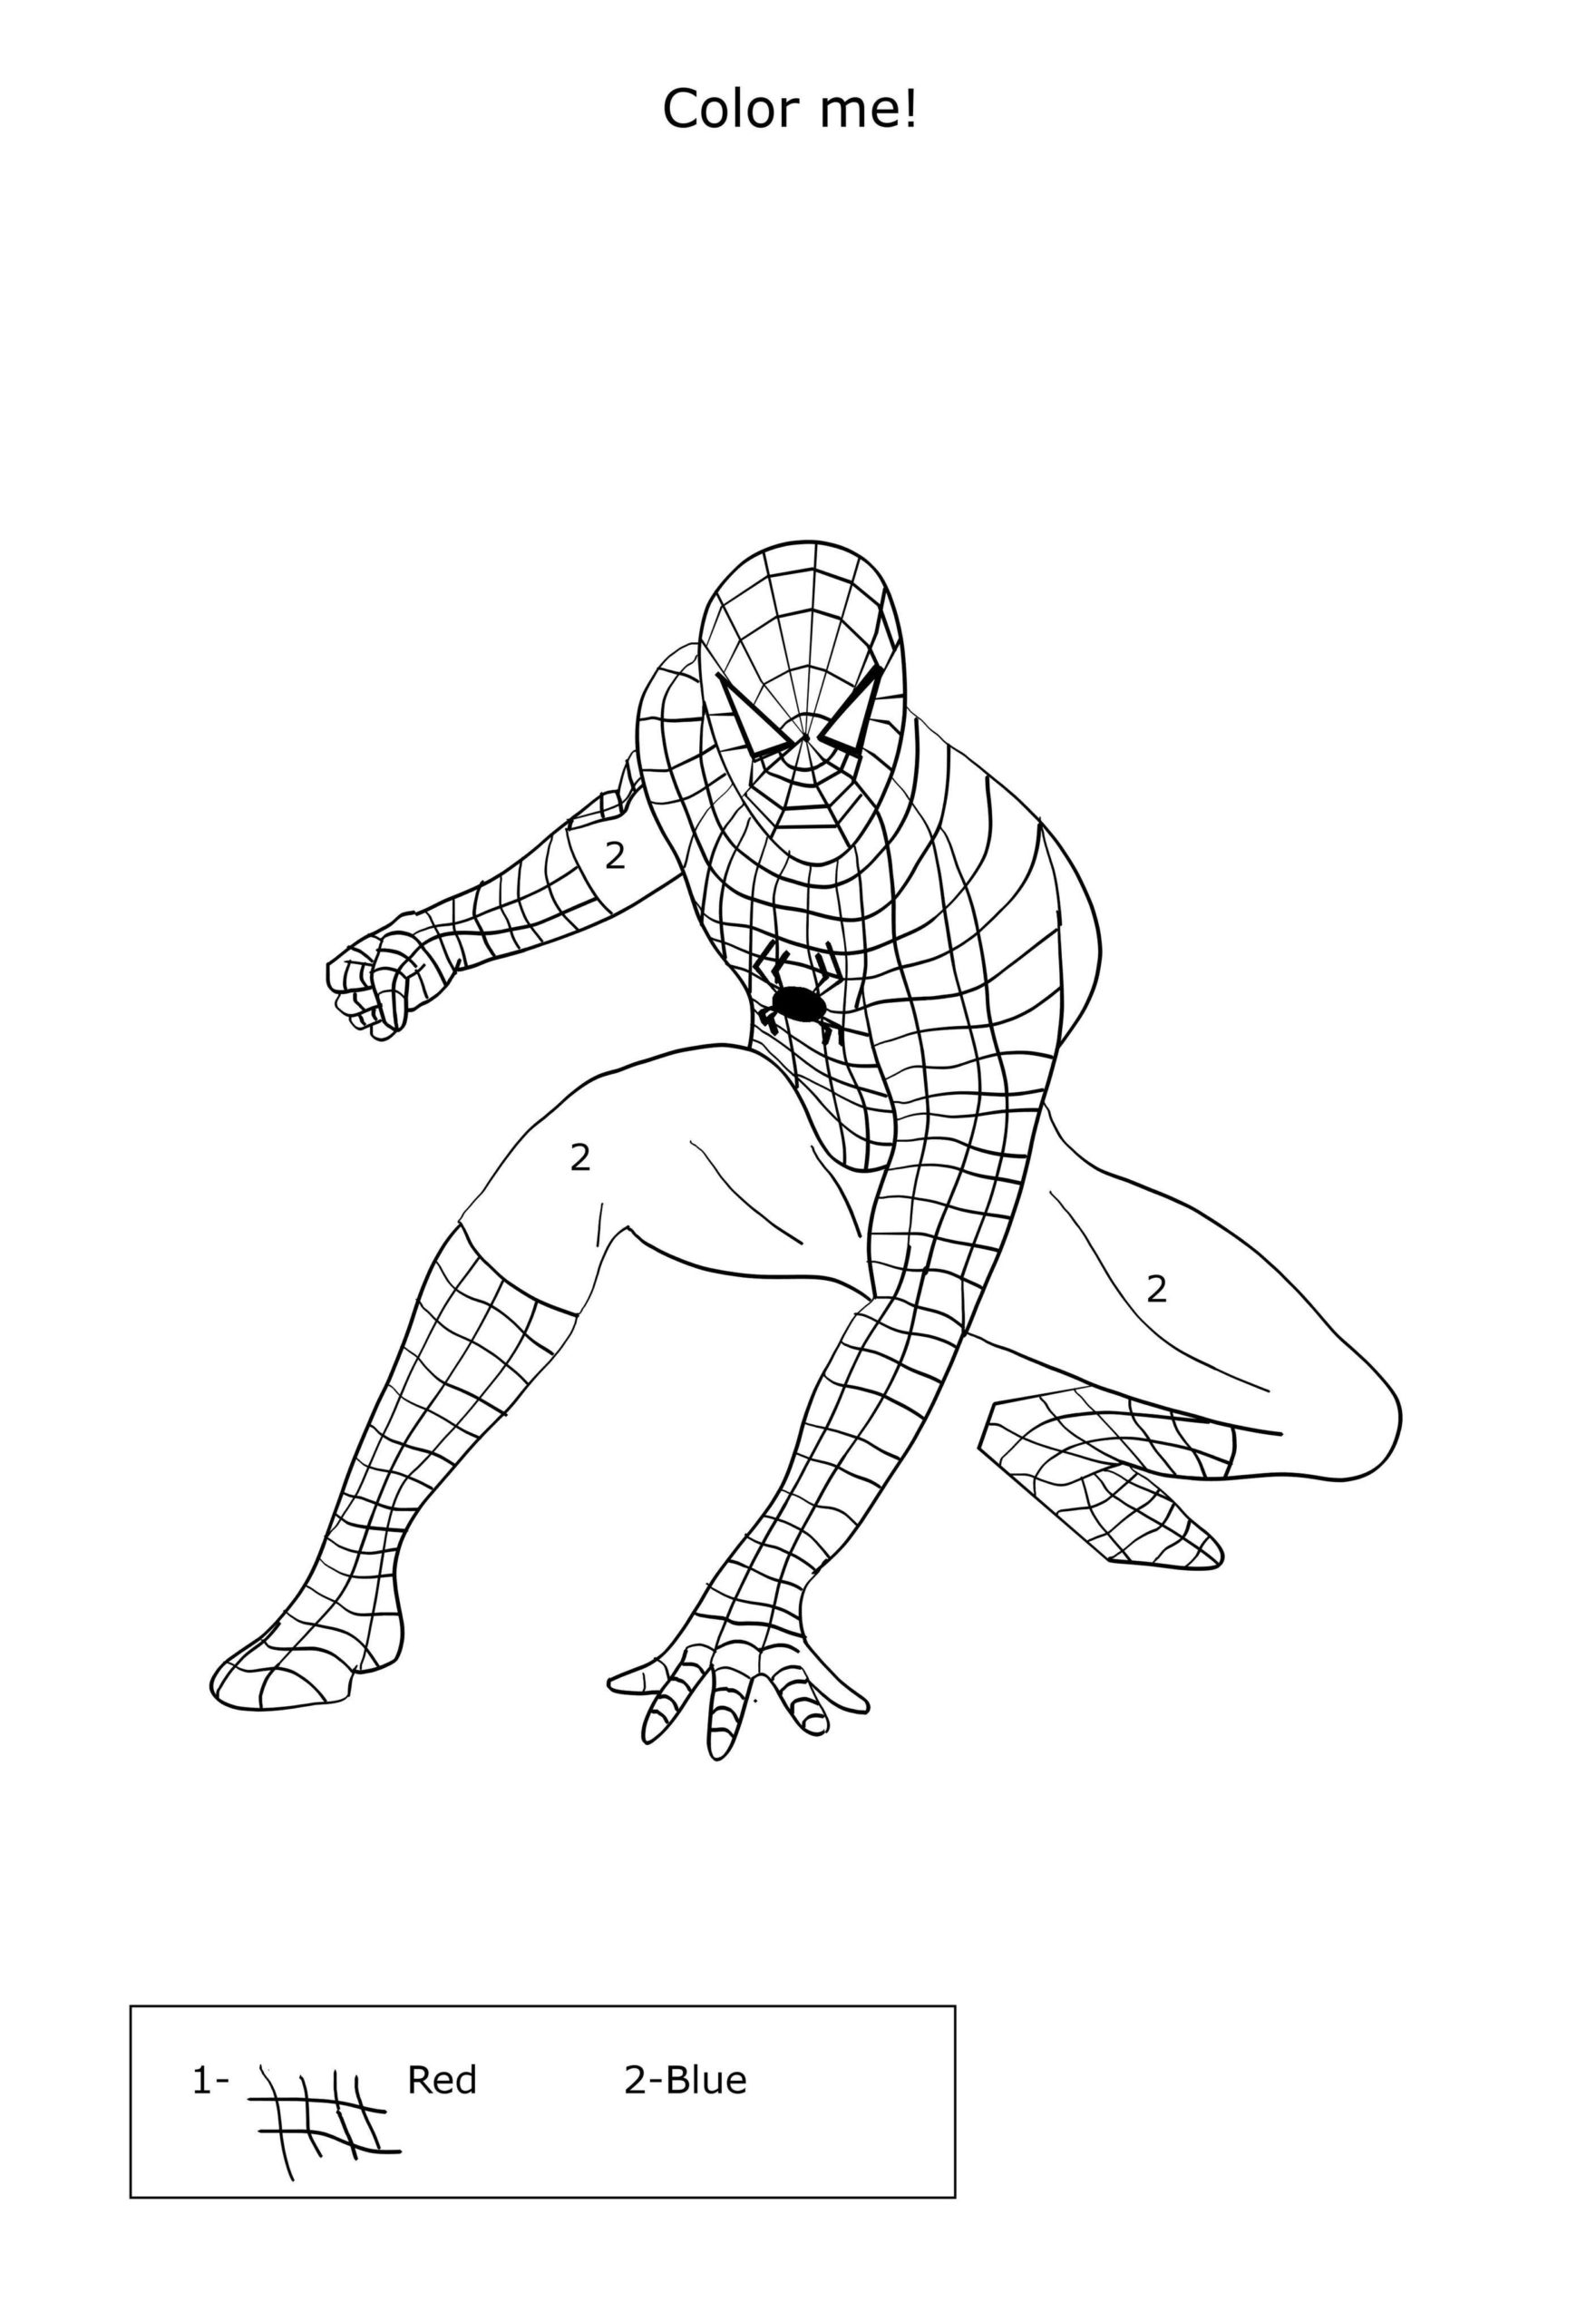 spiderman-coloring-sheets-pack-of-15-coloring-books-for-kidz